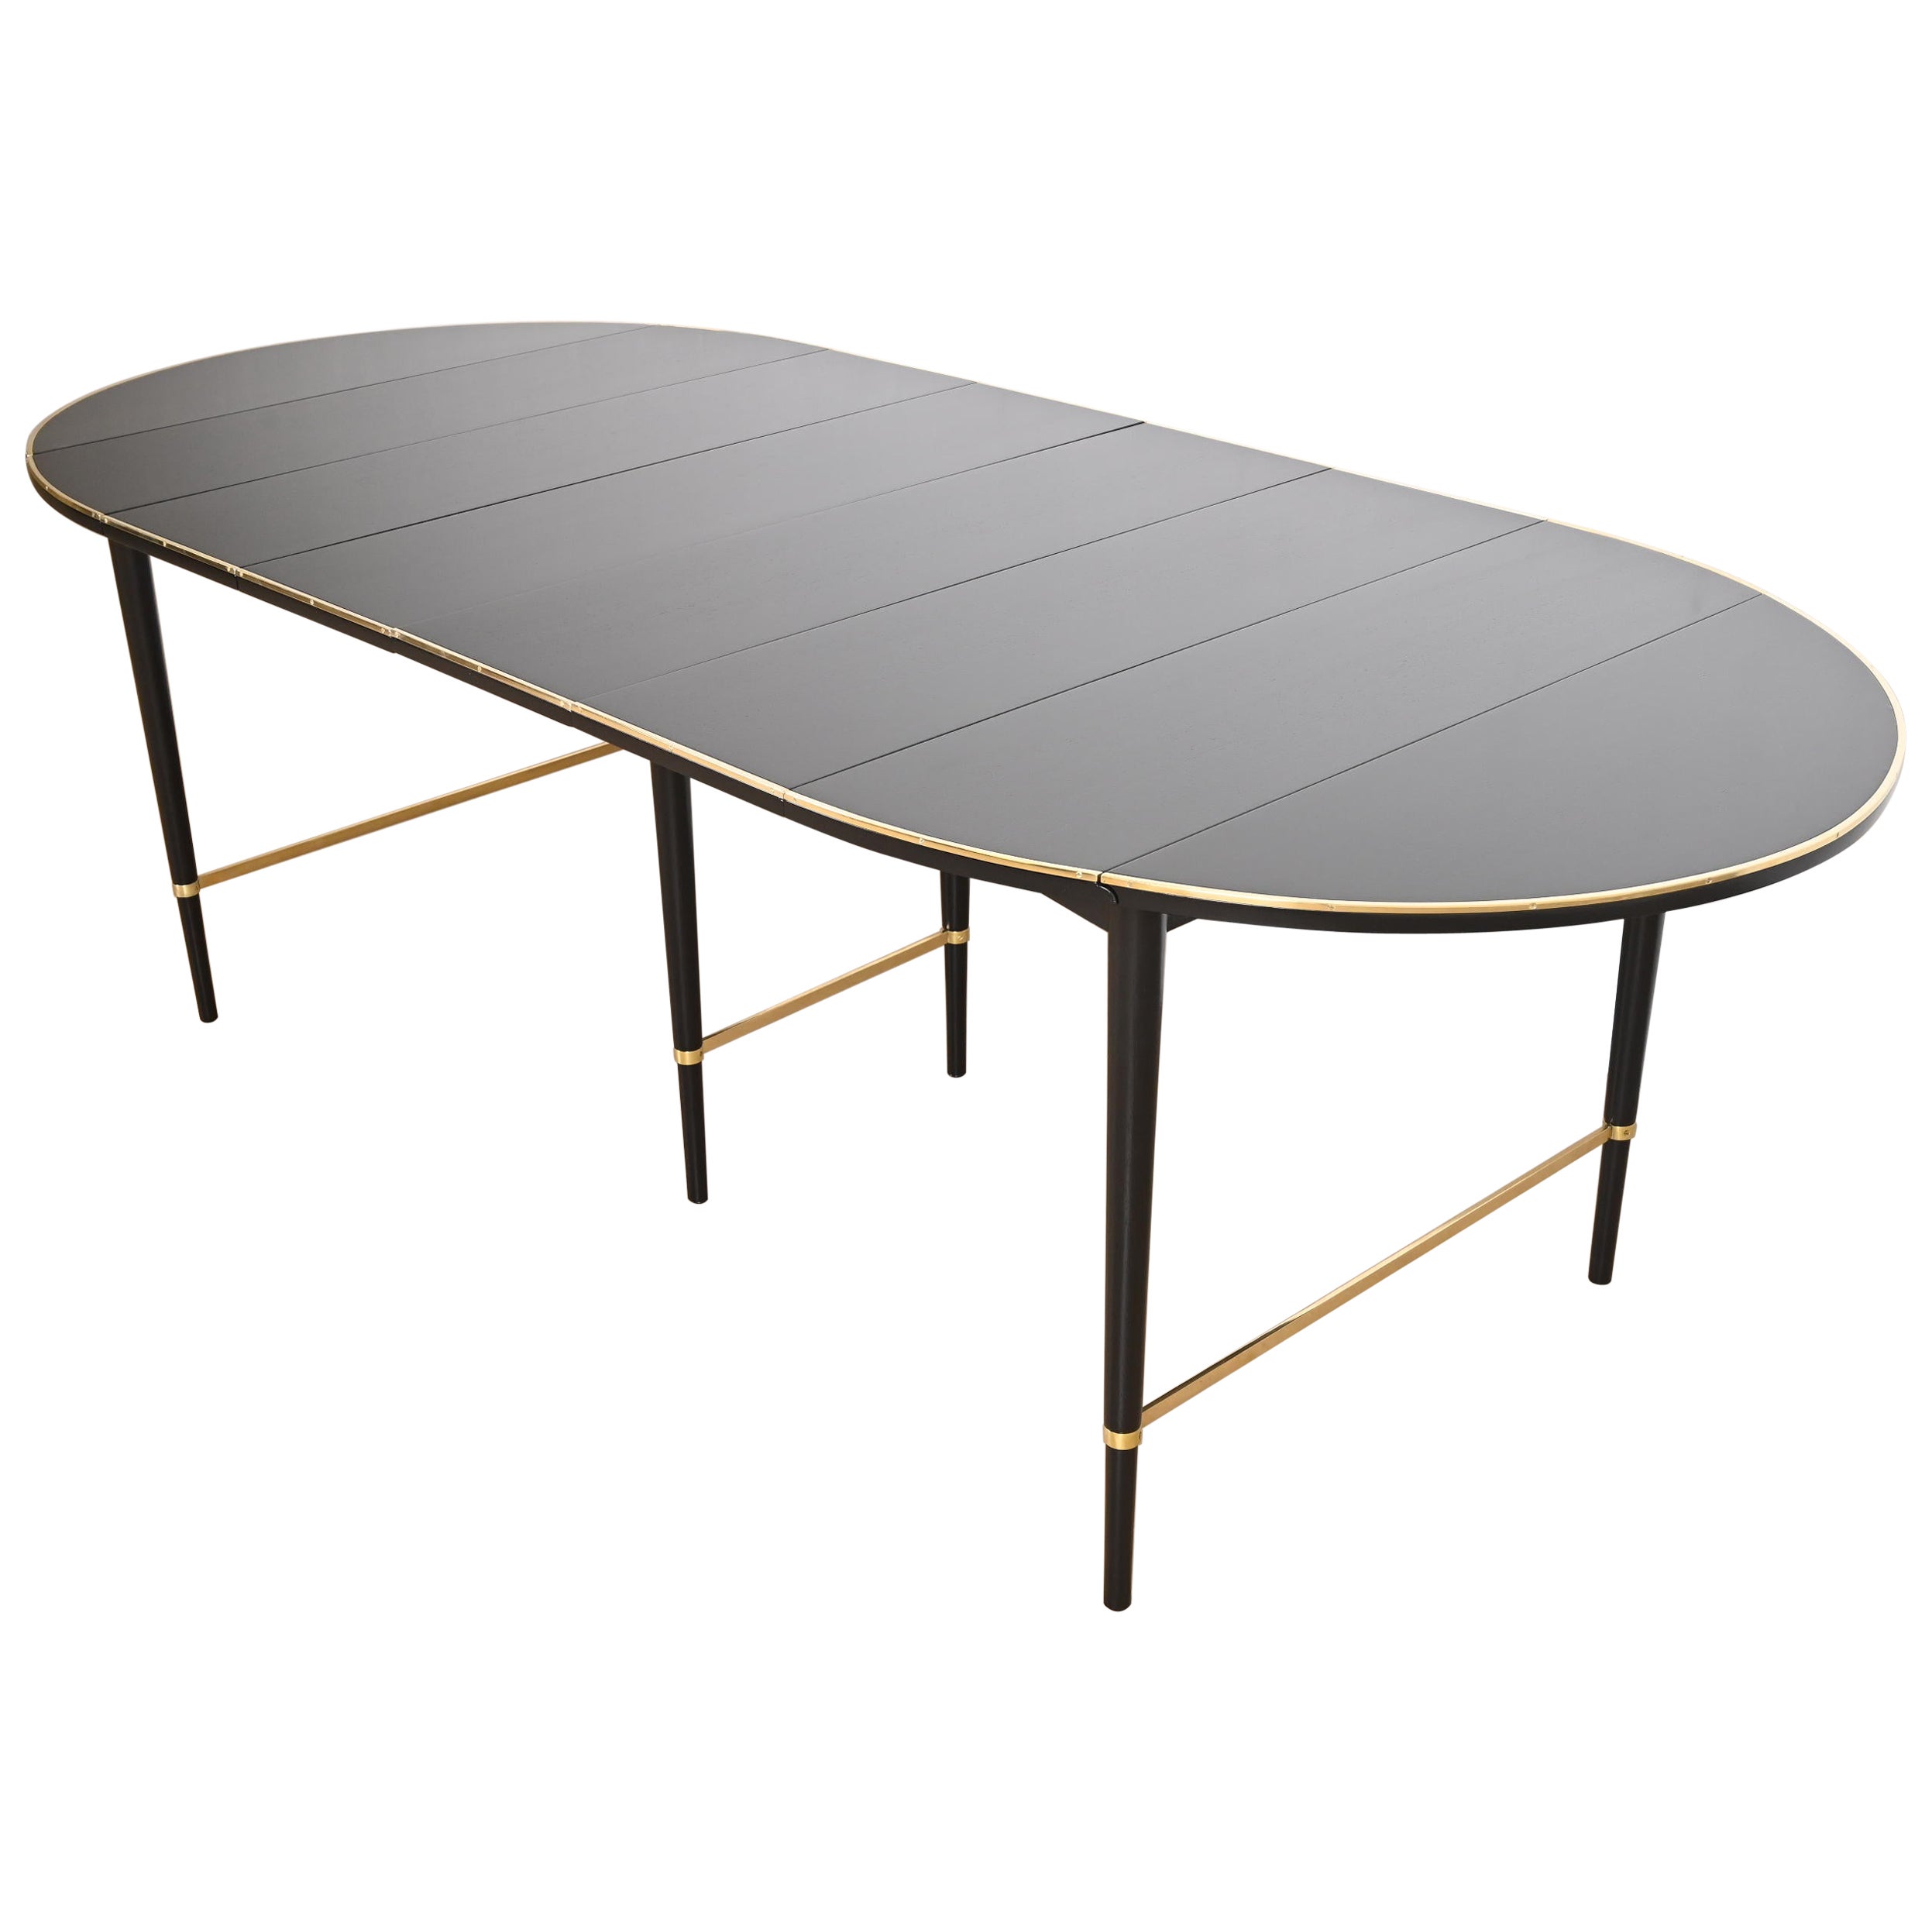 Paul McCobb Black Lacquer and Brass Dining Table, Newly Refinished